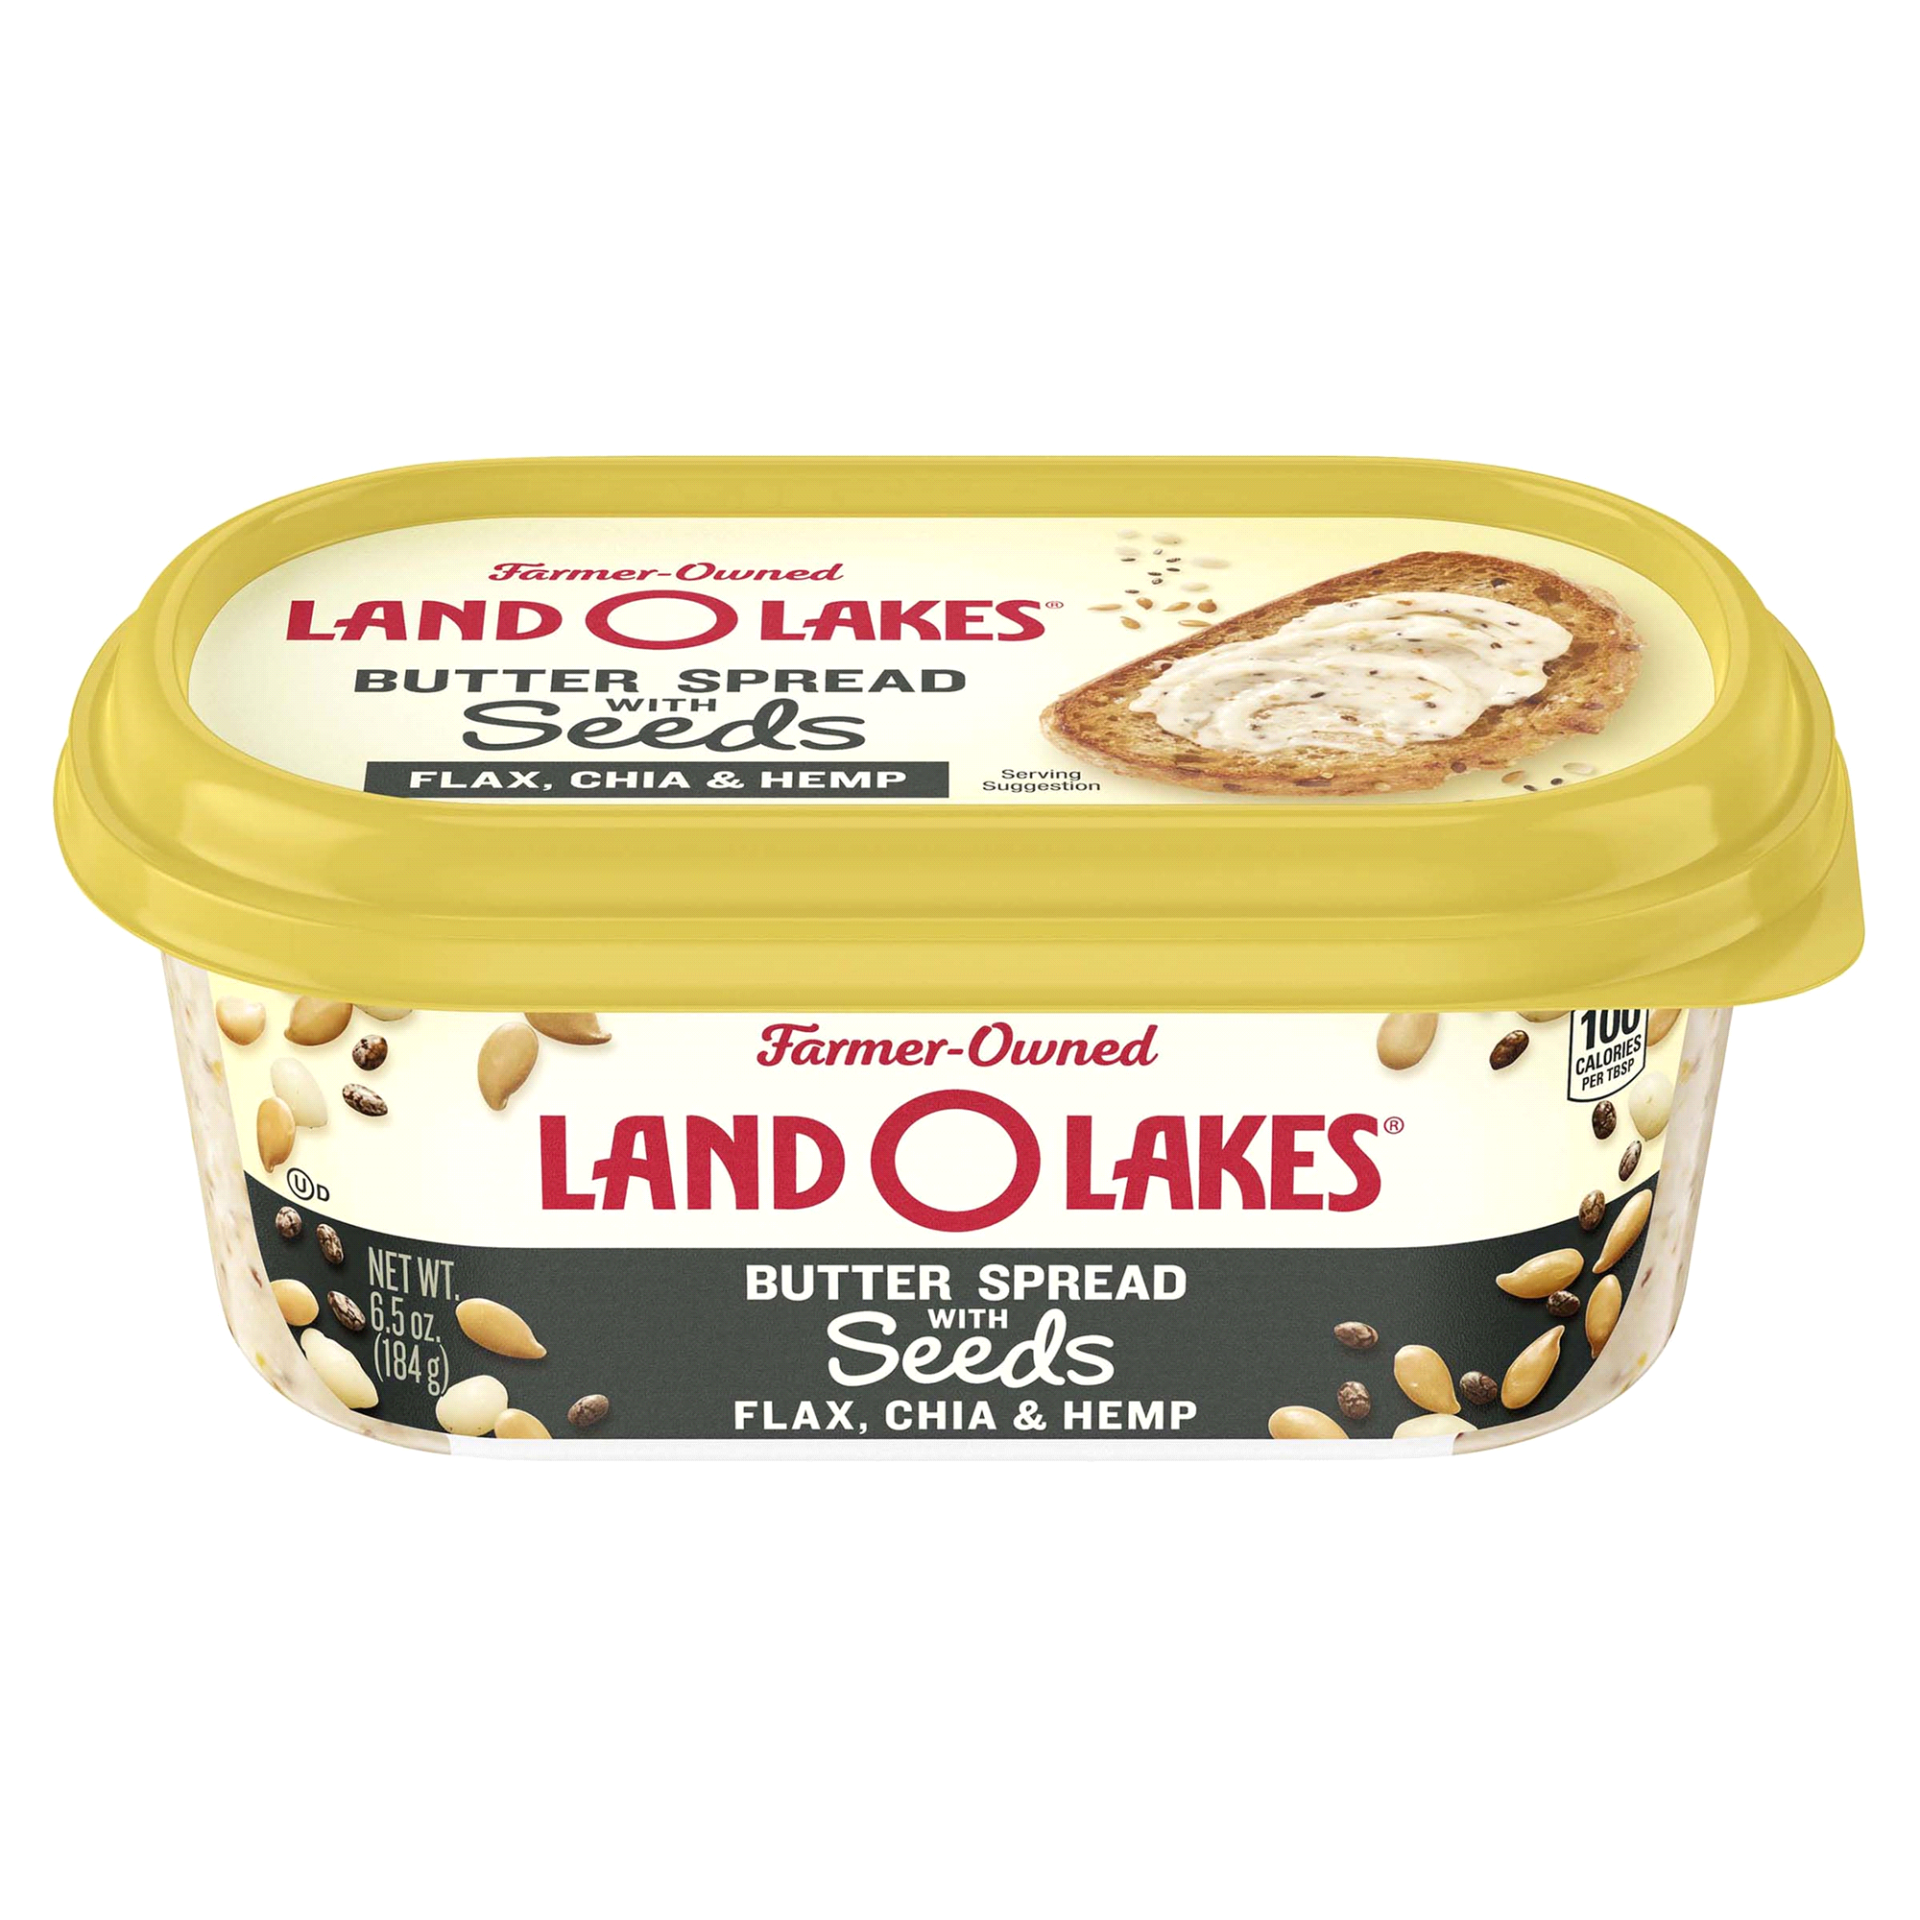 slide 1 of 1, Land O'Lakes Butter Spread with Seeds - Flax, Chia & Hemp, 6.5 oz Tub, 6.5 oz